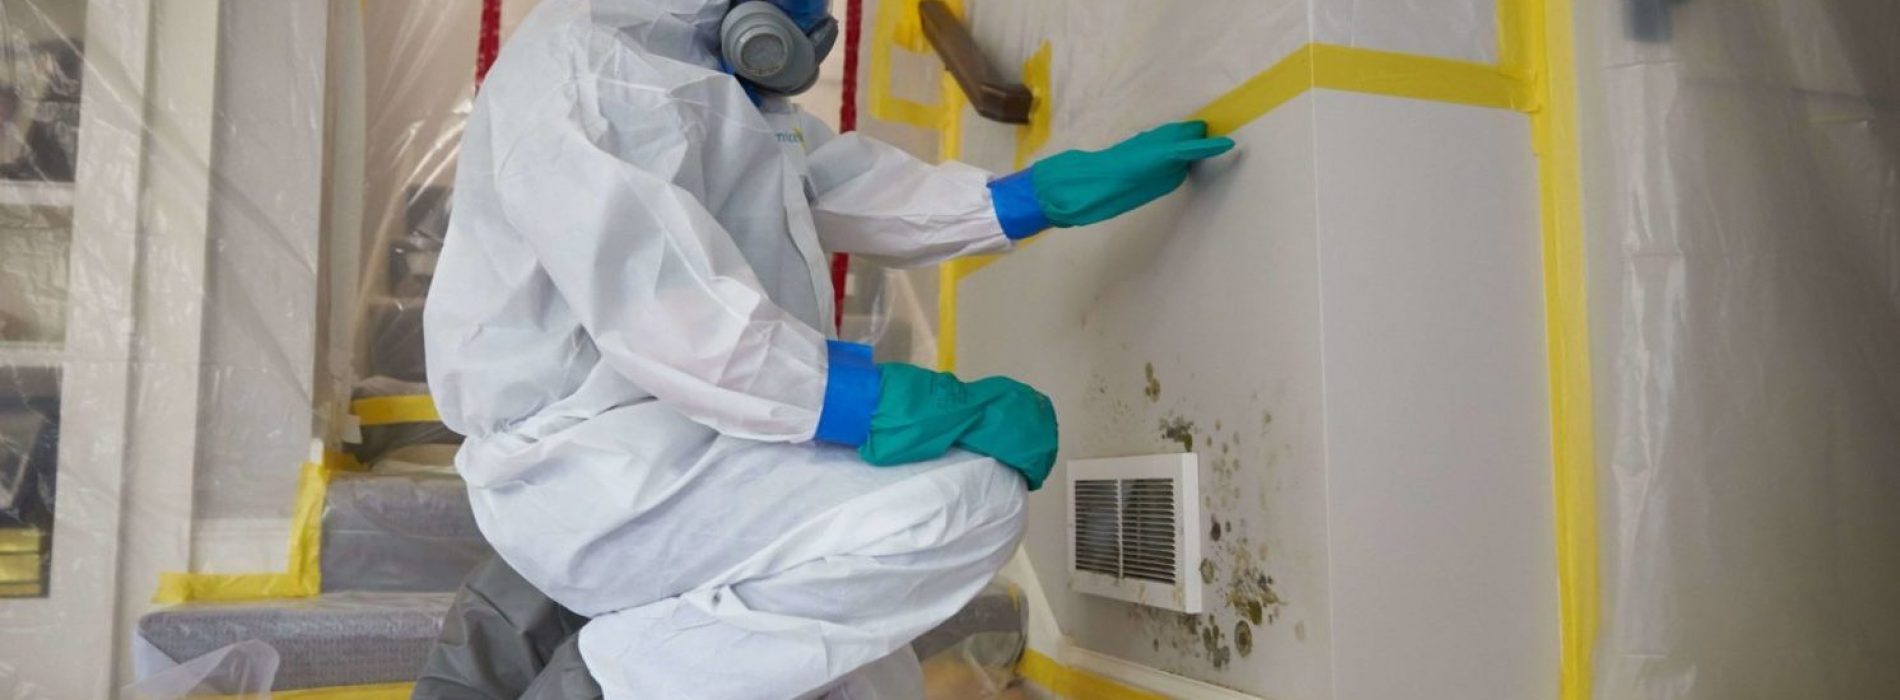 Mold Remediation Certification – Exploring a Career in Mold Remediation